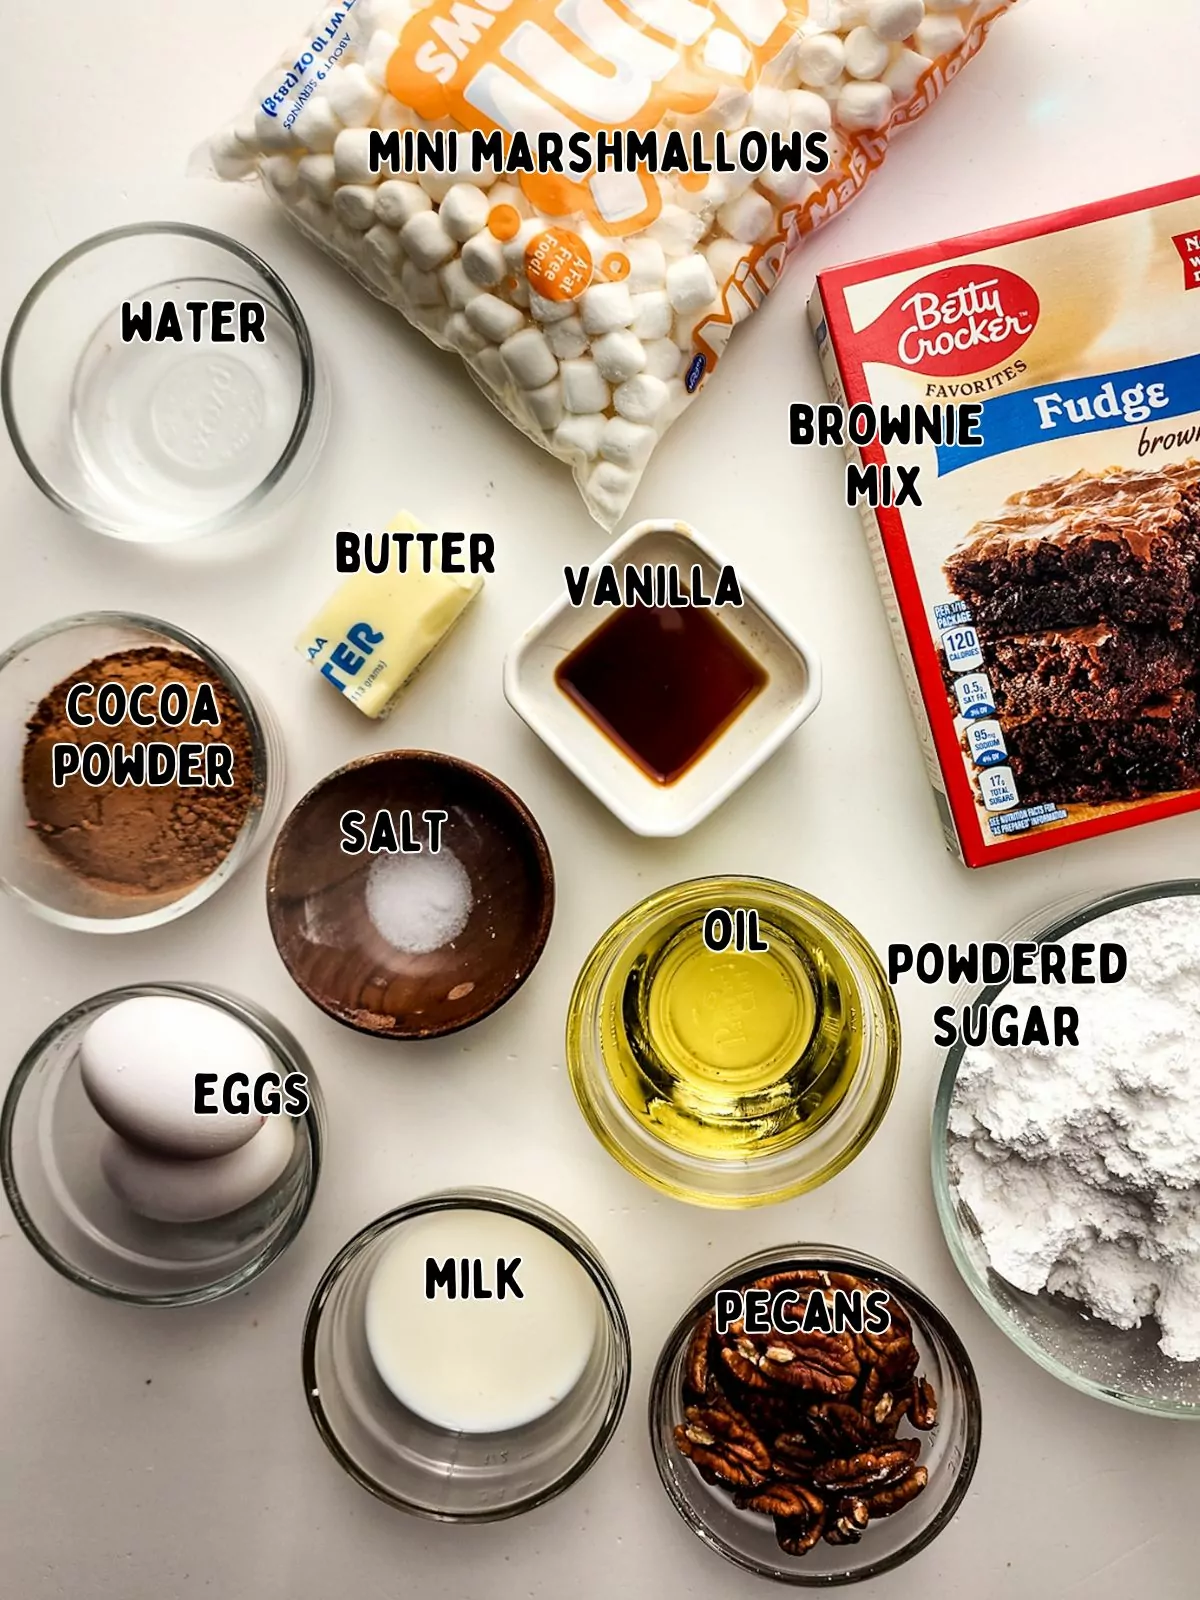 ingredients for brownies with marshmallows and pecans.